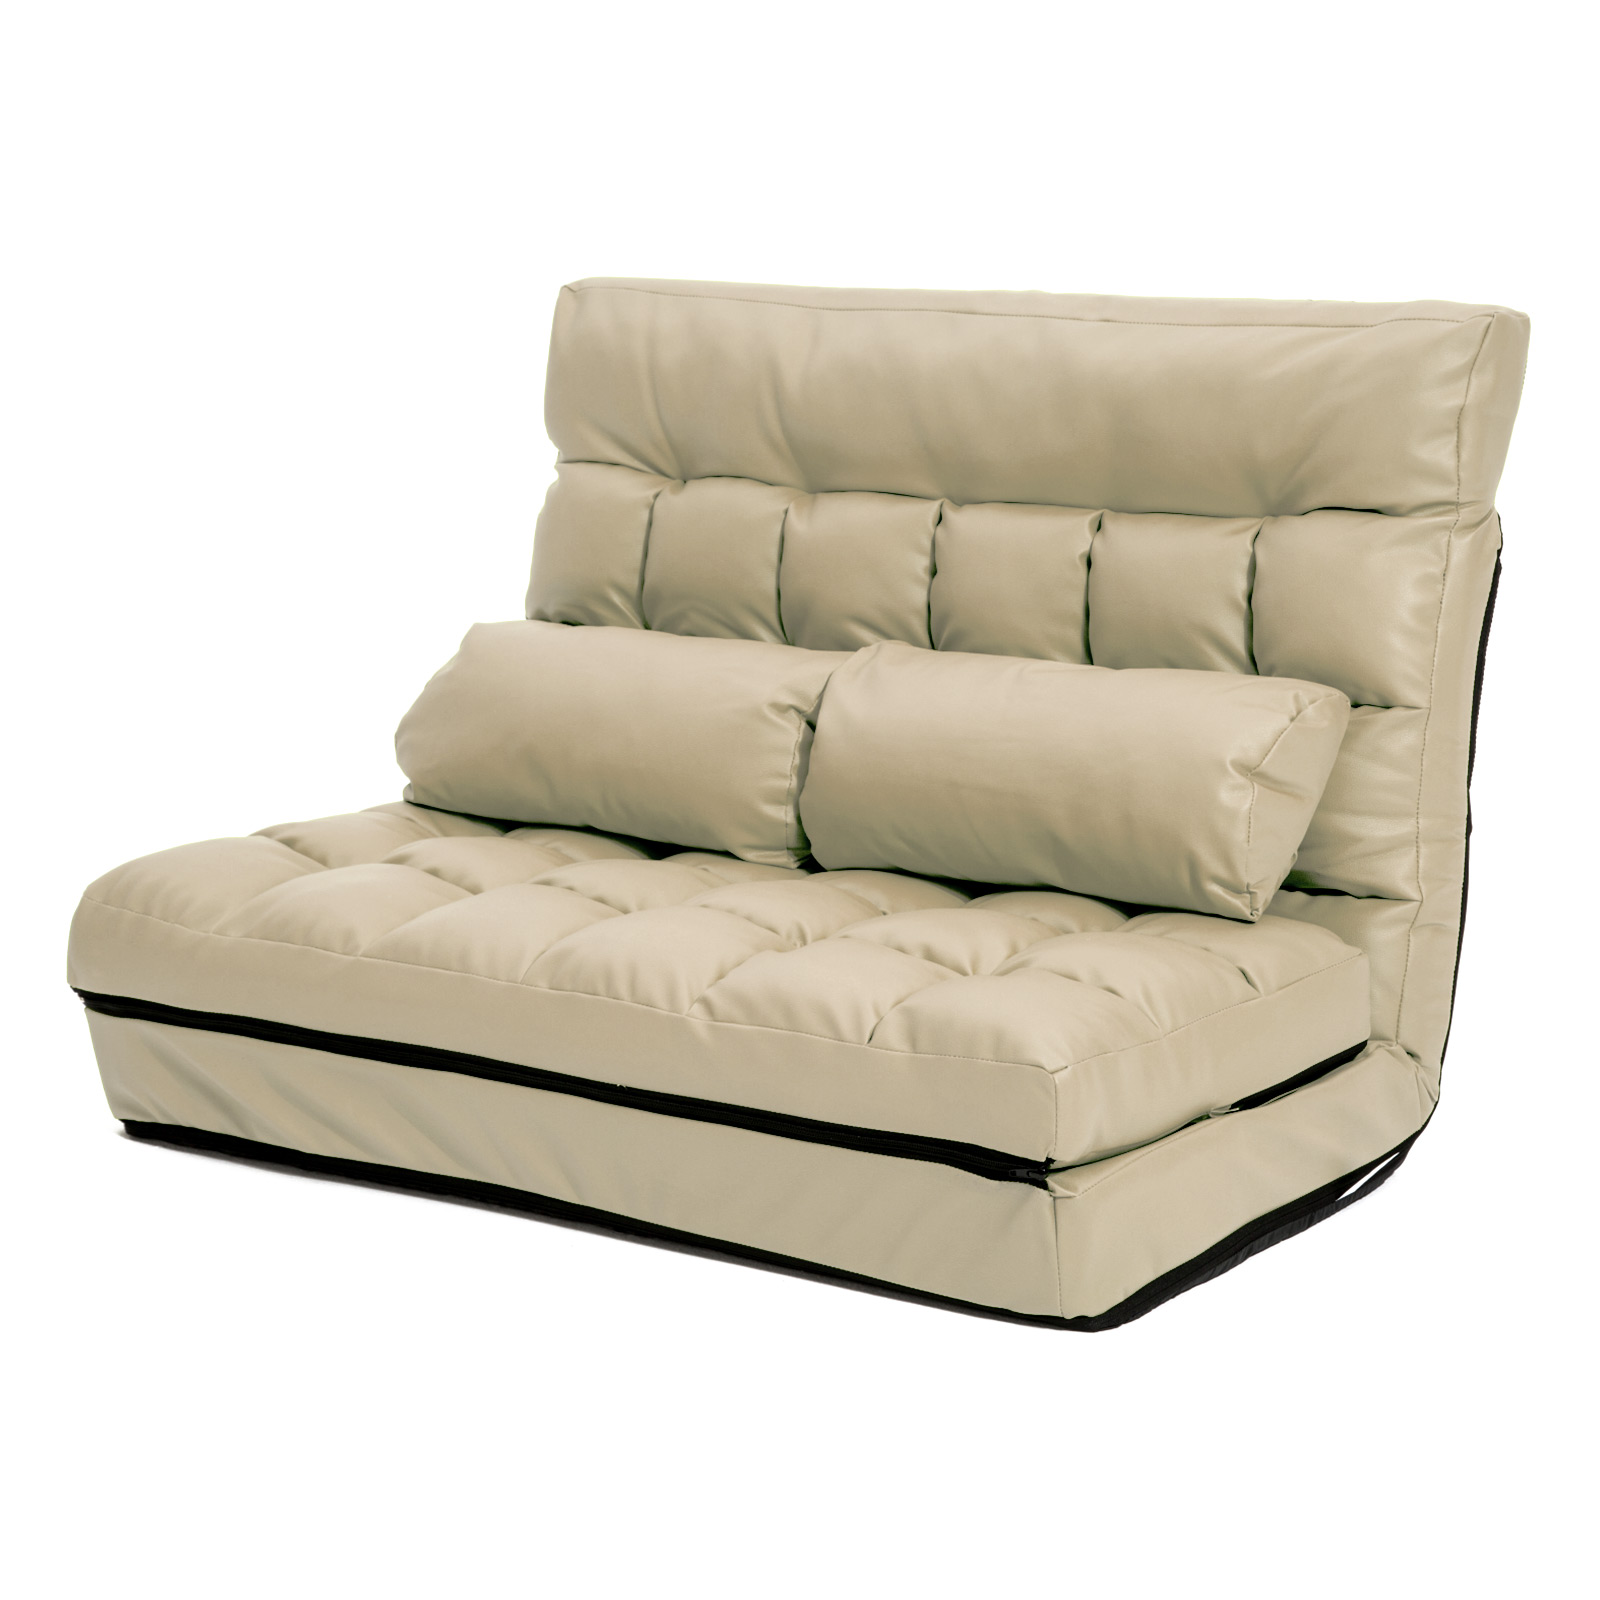 Leather Lounge Sofa Bed Double Seat Couch GEMINI - BEIGE